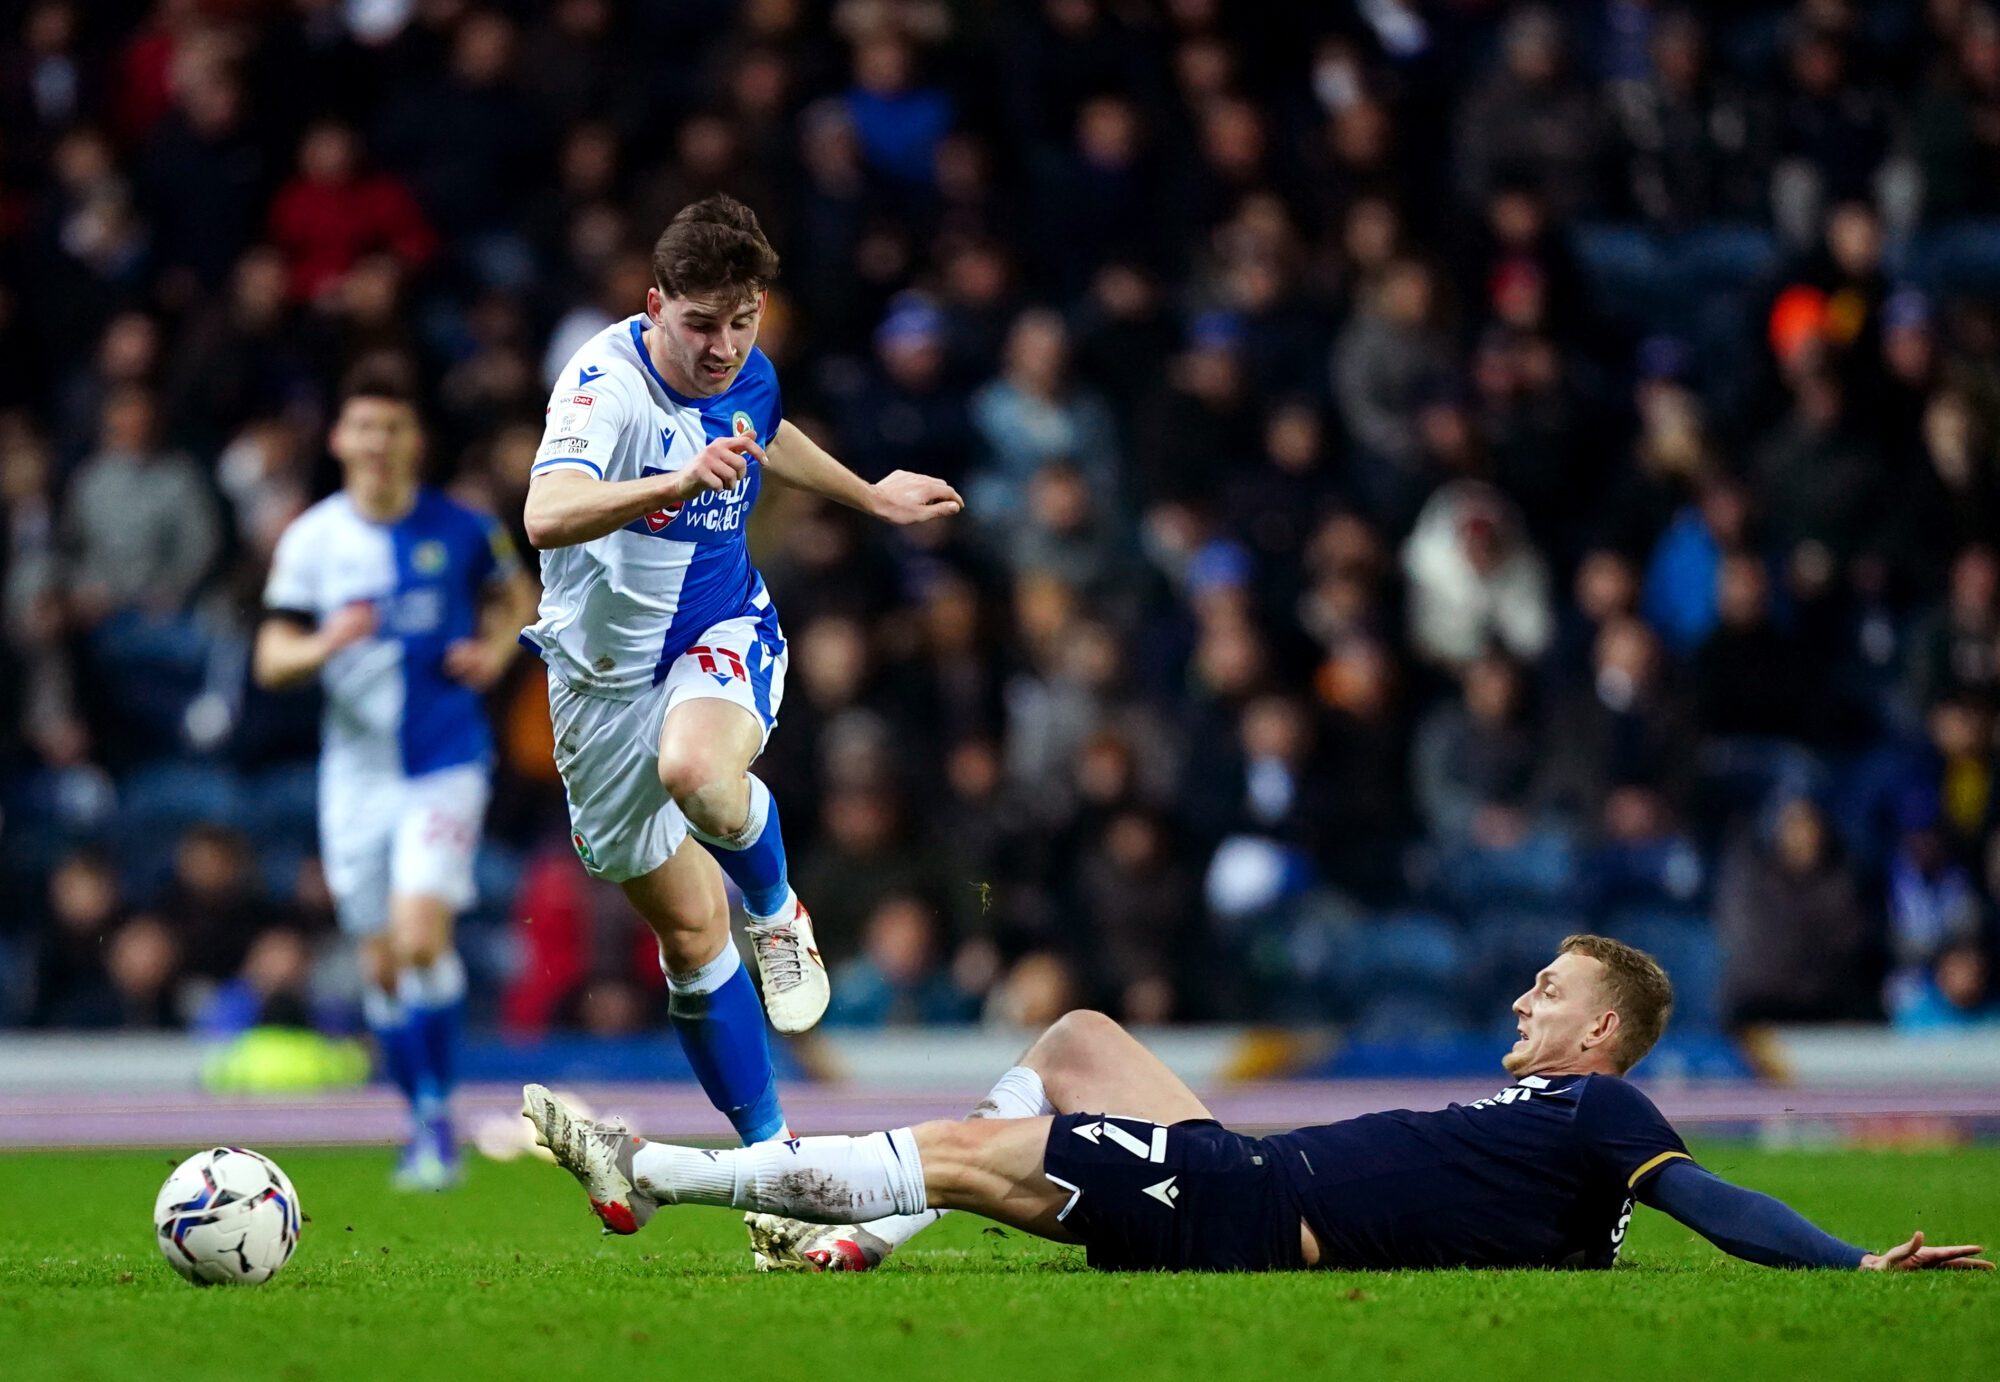 Millwall see strong penalty appeal turned down as they lose 2-1 at Blackburn  Rovers – South London News